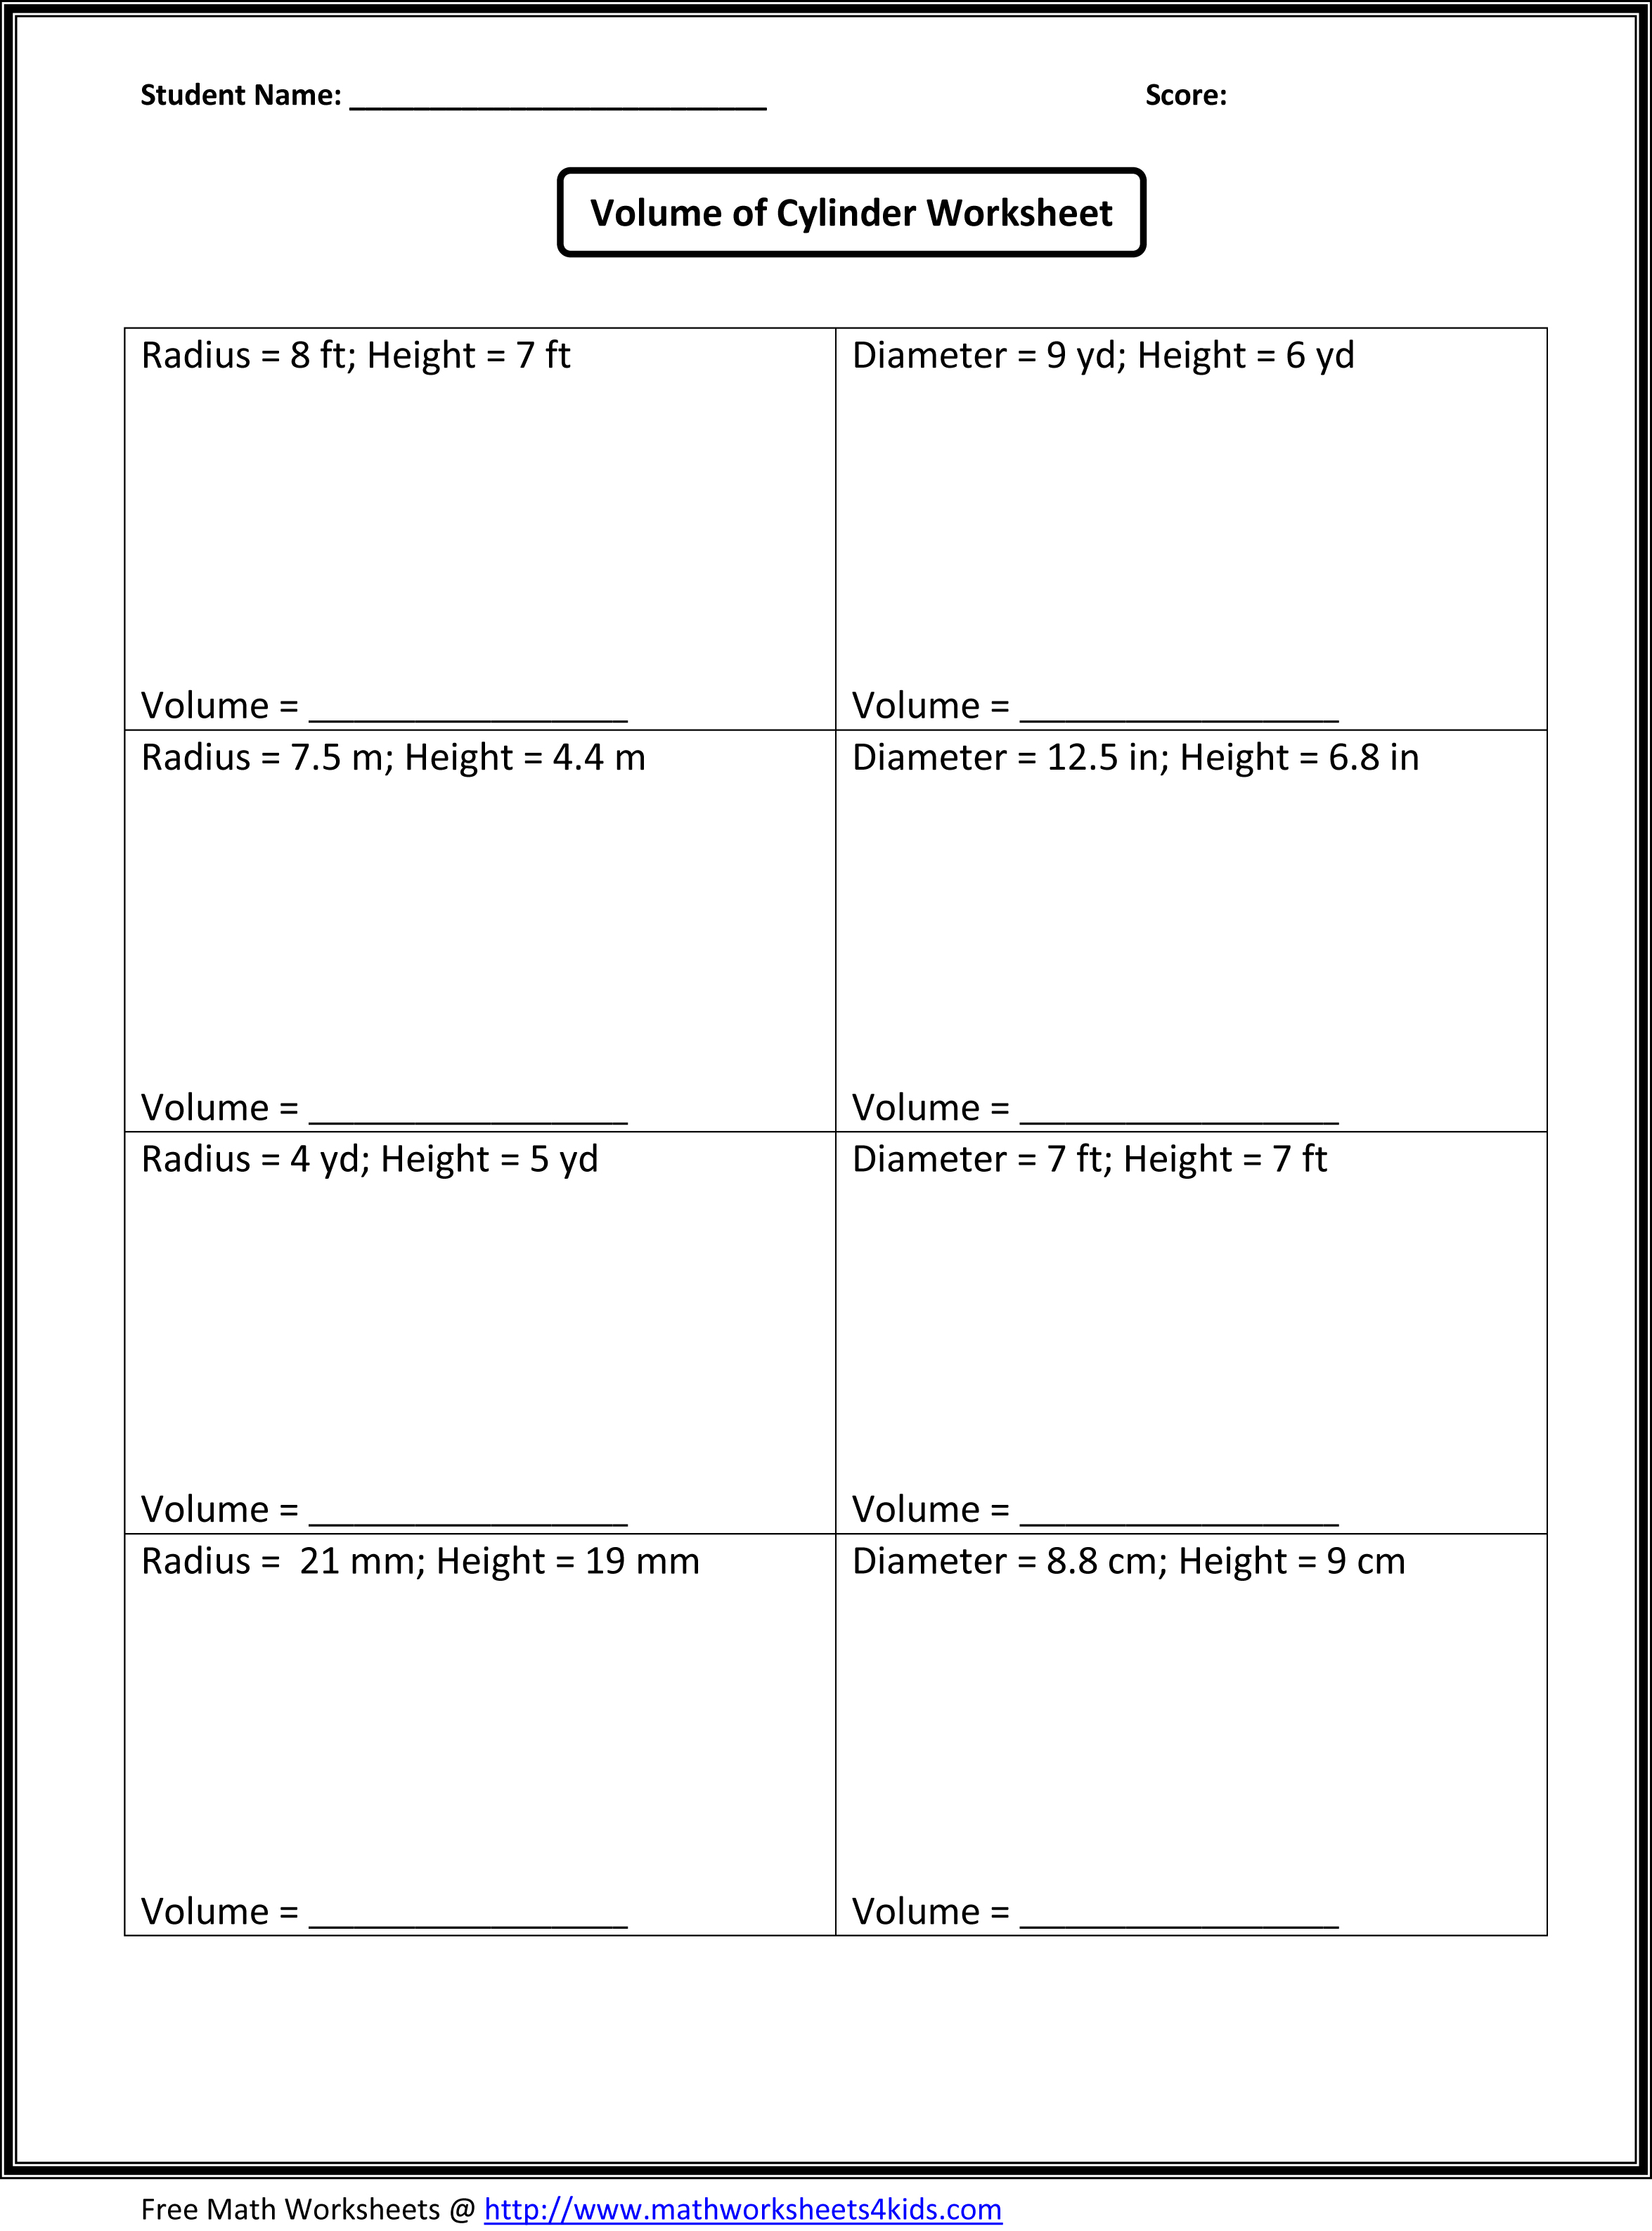 12 Best Images of Function Operations Worksheets - 7th Grade Math